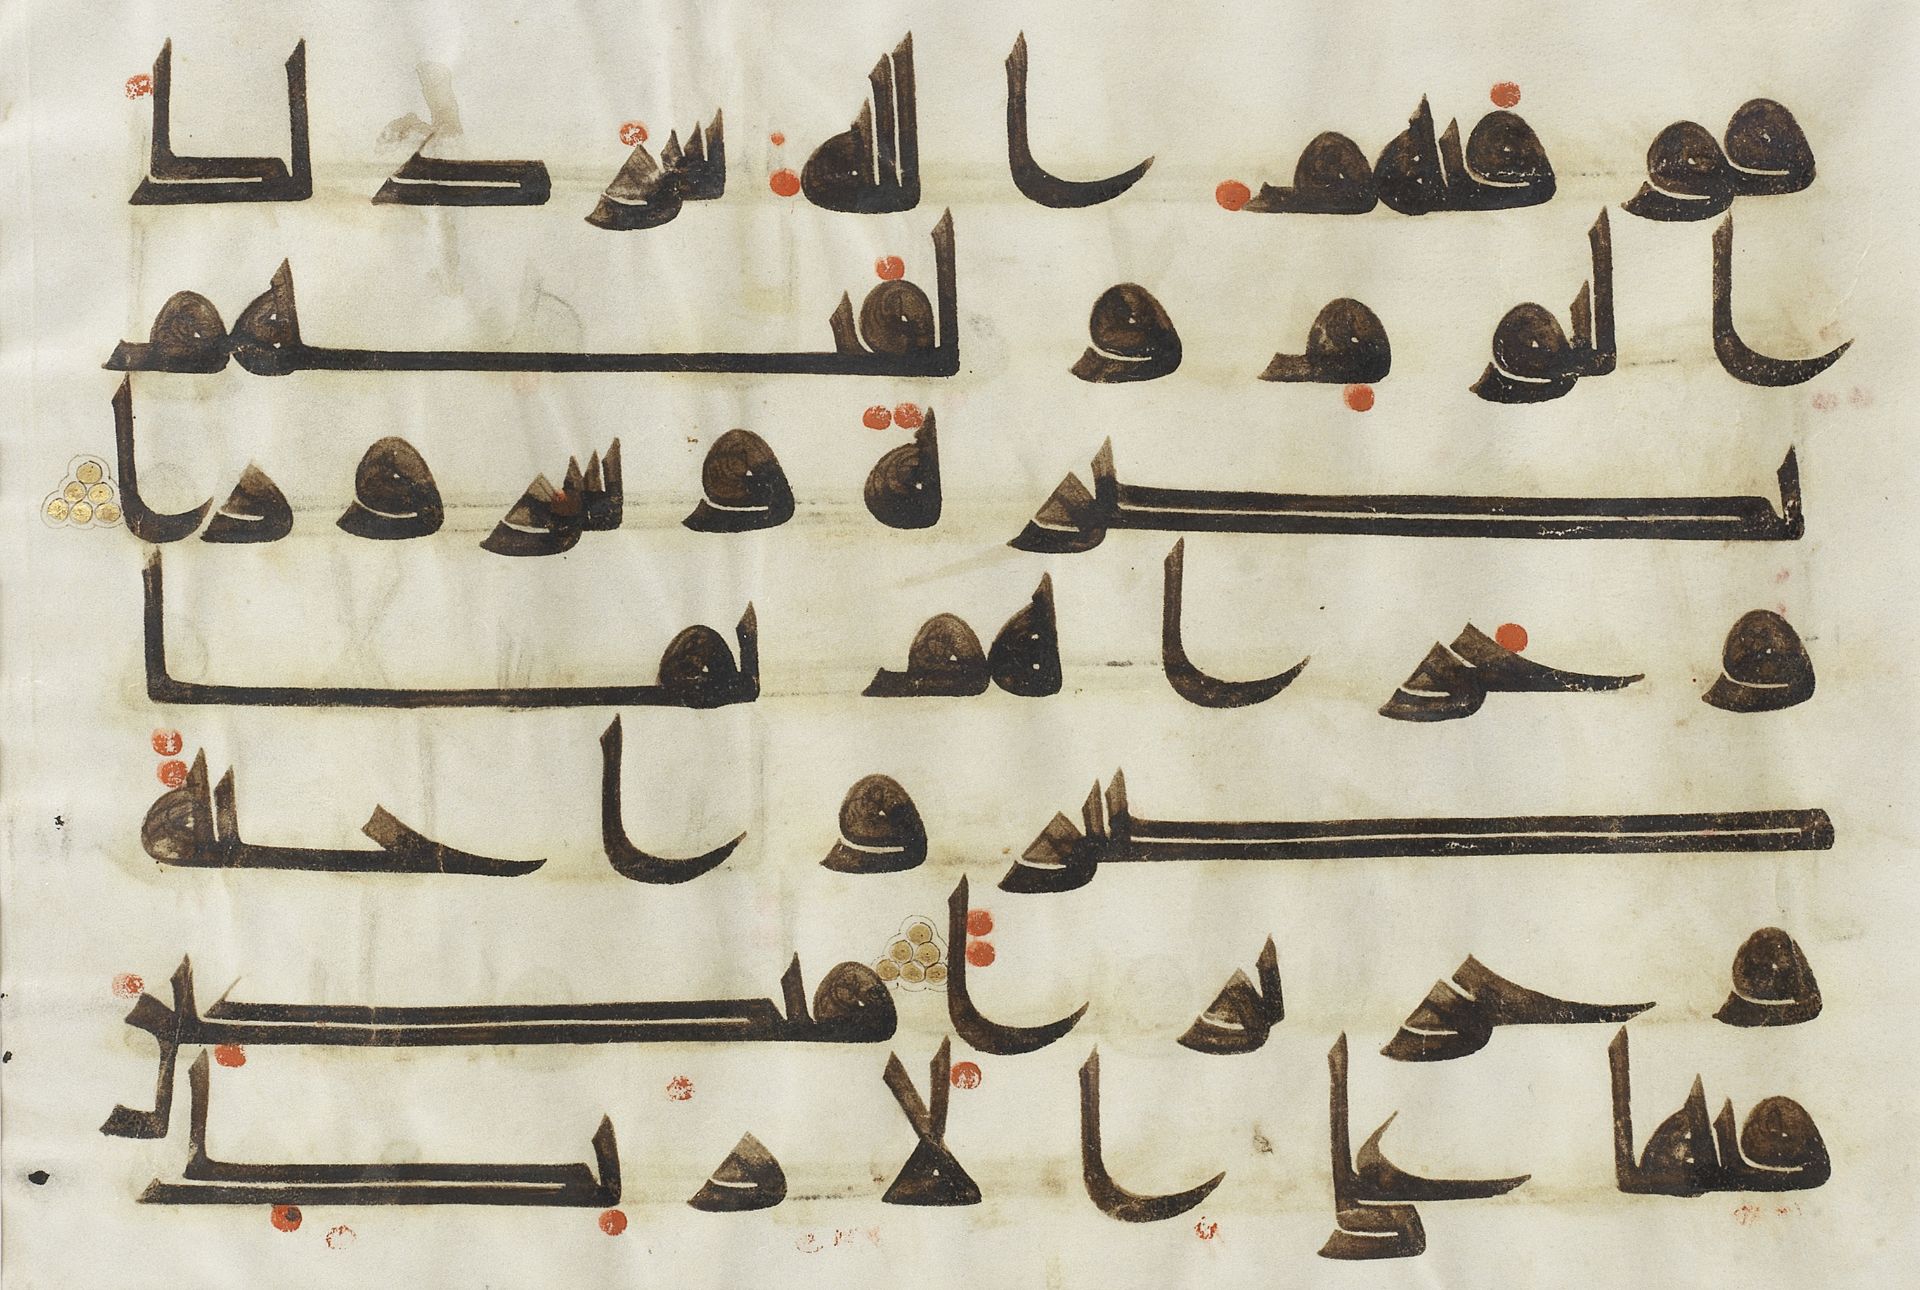 A Qur'an leaf written in kufic script on vellum Near East or North Africa, 9th-10th Century